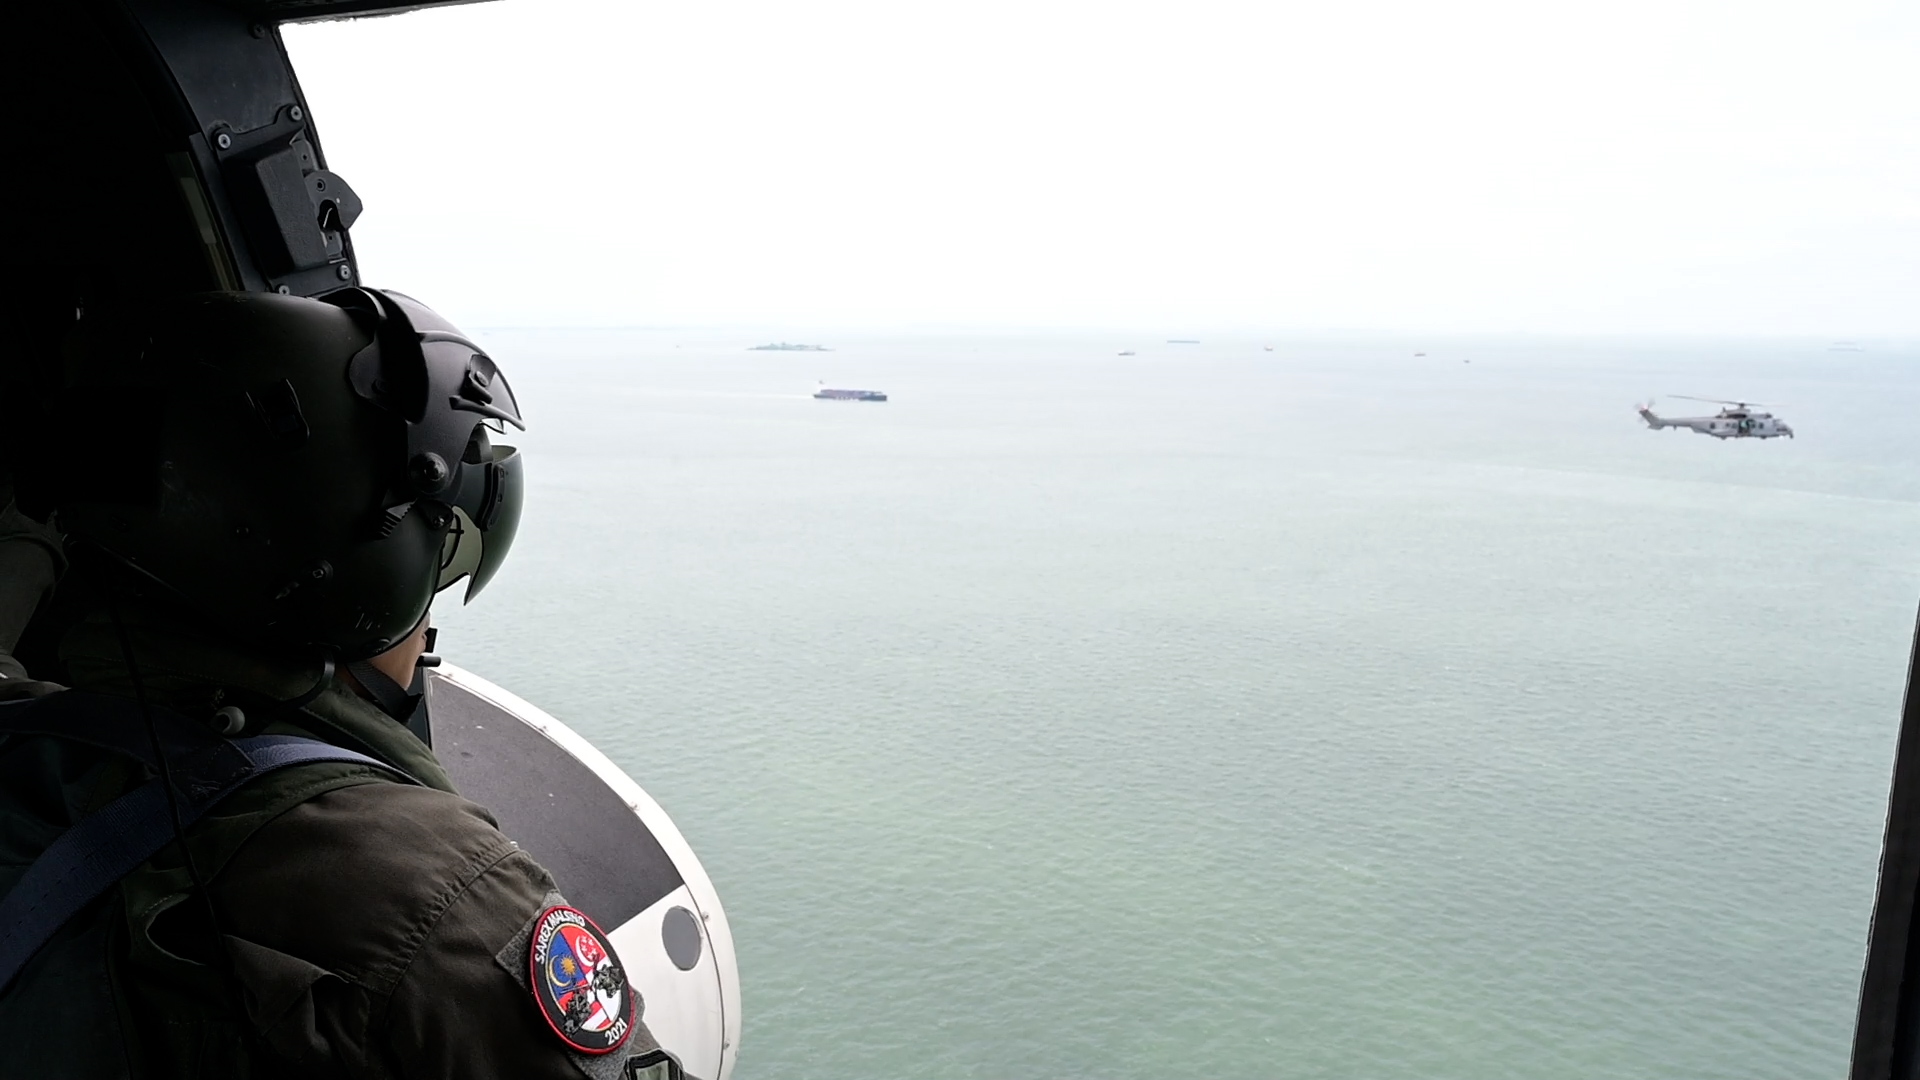 An RMAF EC725 helicopter (background) conducting Search and Locate operations with an RSAF AS322M Super Puma helicopter, as part of the combined FTX.